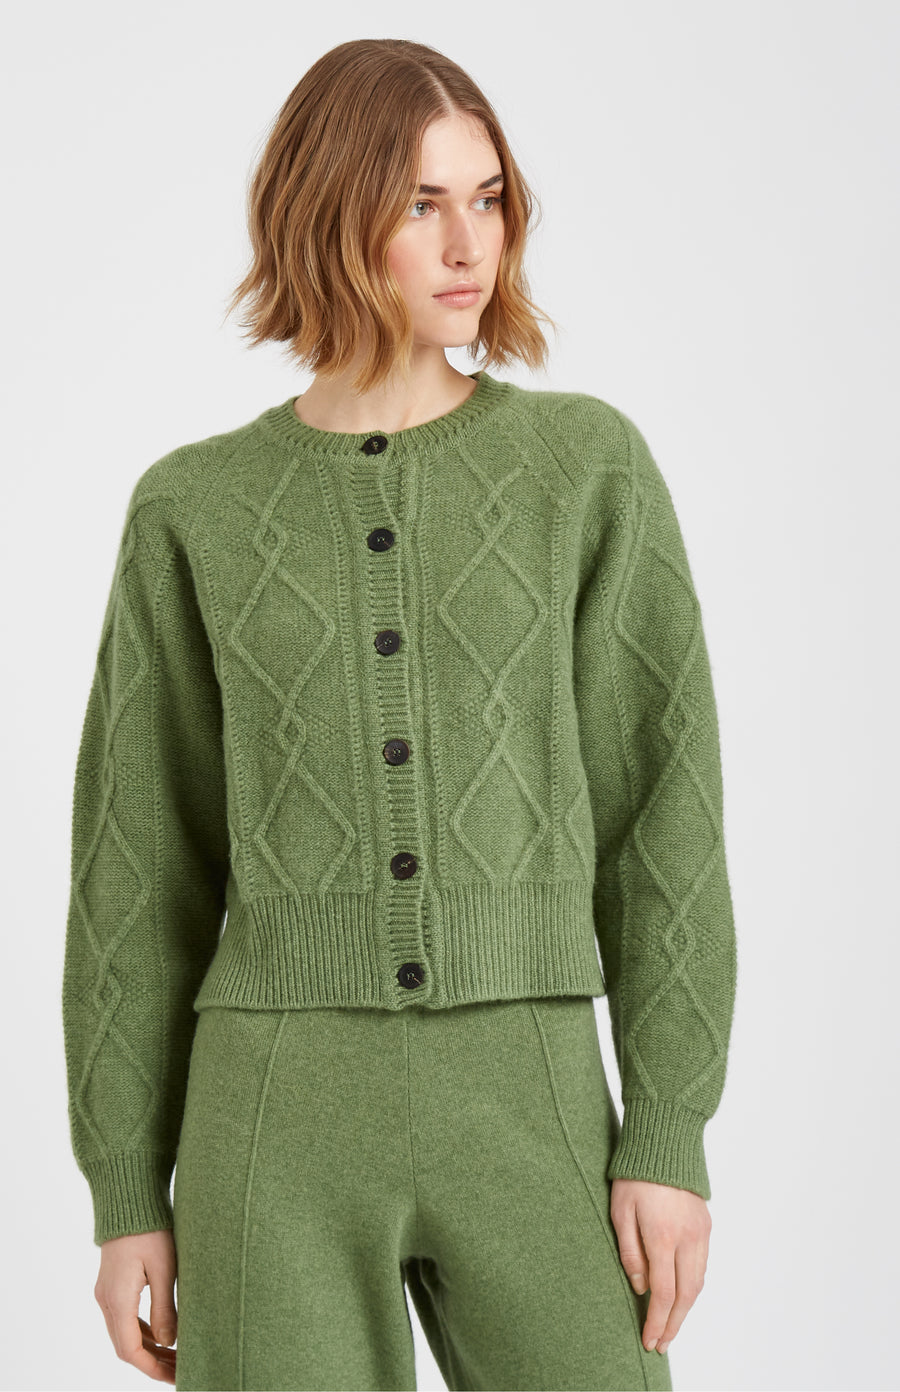 Pringle of Scotland Multi Texture Cashmere blend cardigan in Wood Sage on midel